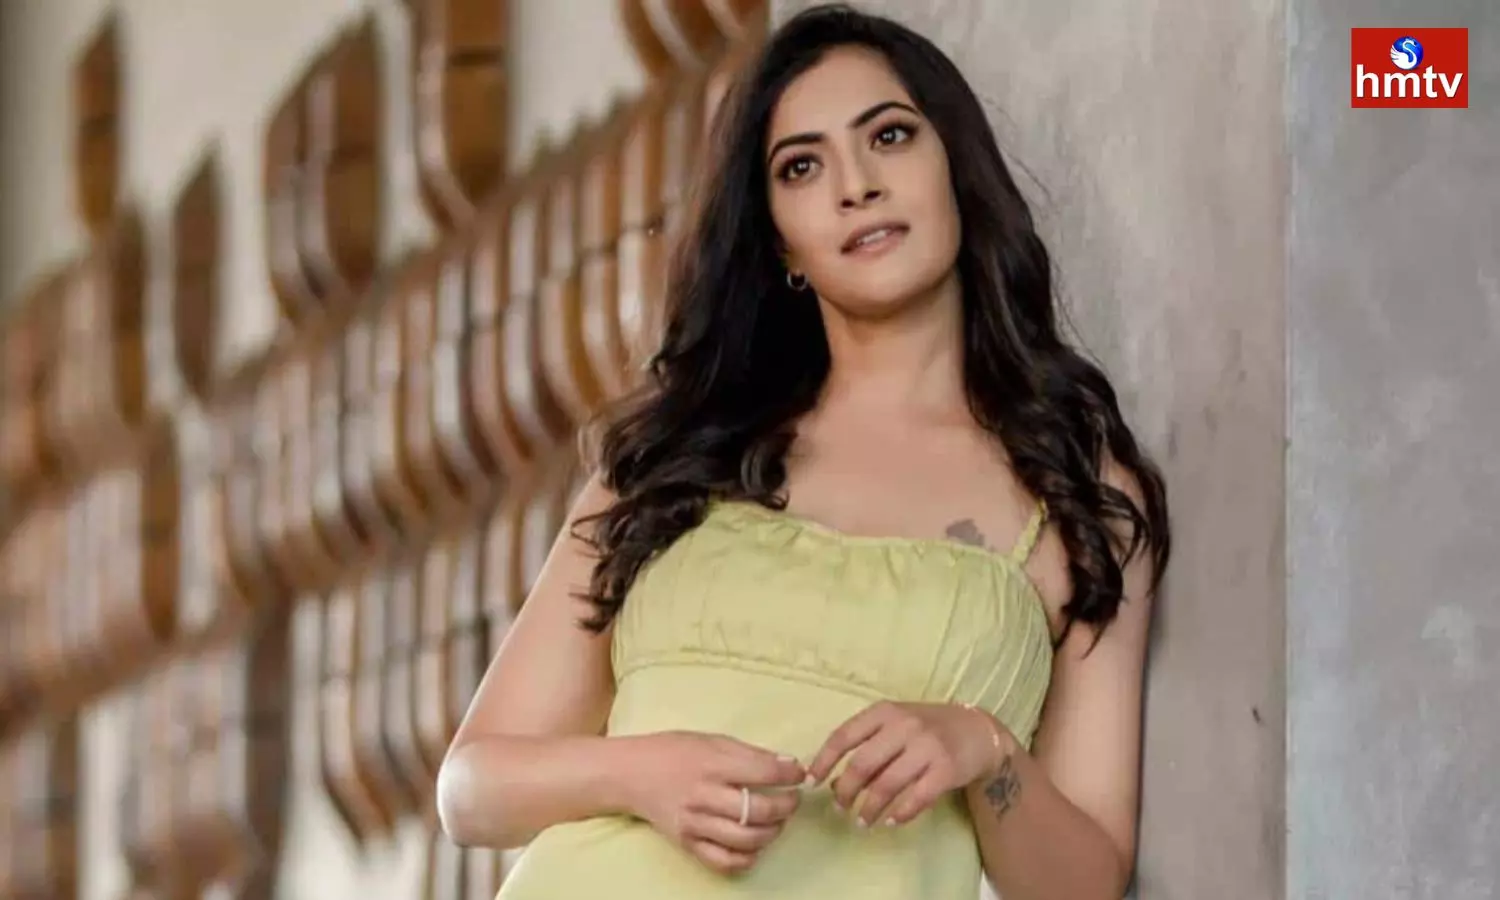 Varalaxmi Sarathkumar Talks About the Criticism She Faced for Her Voice